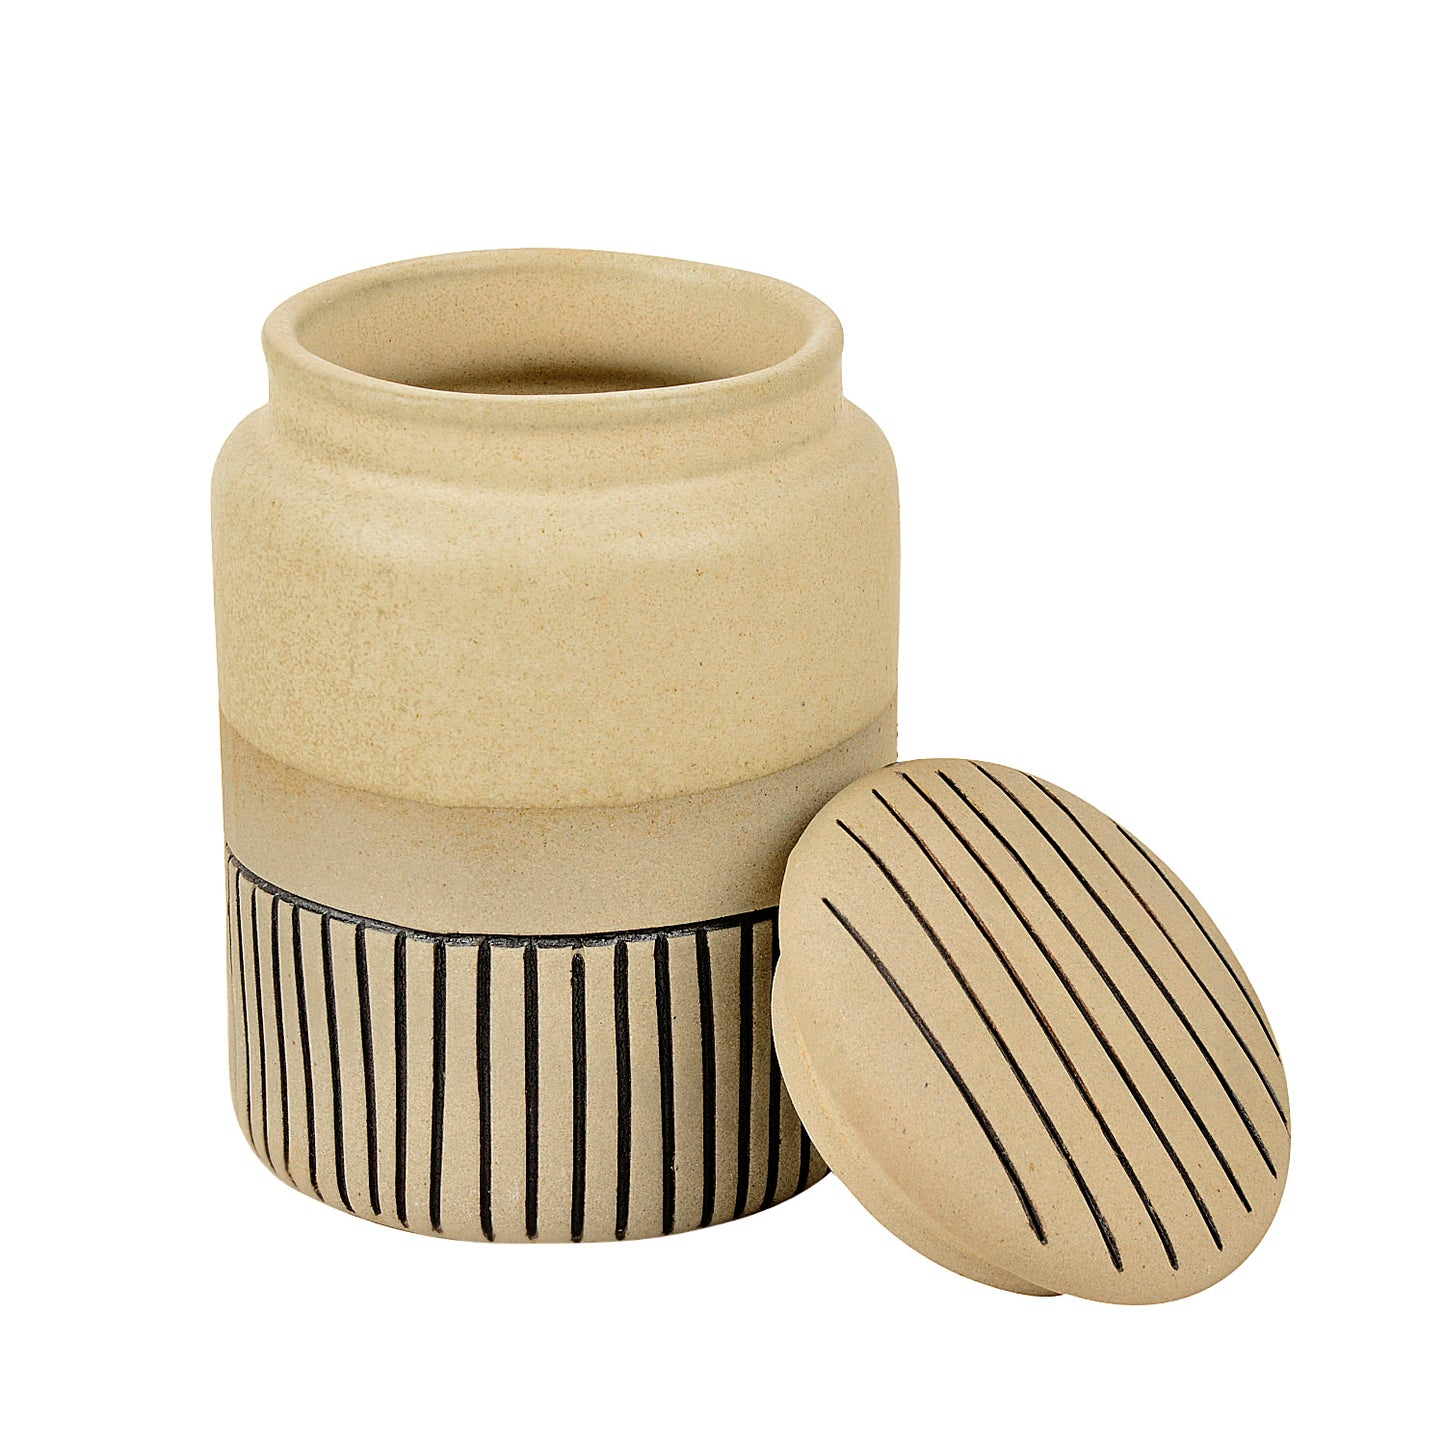 Handcrafted Ceramic Striped Jar with Rustic Look and Lid (700 ml, Off White and Blue)